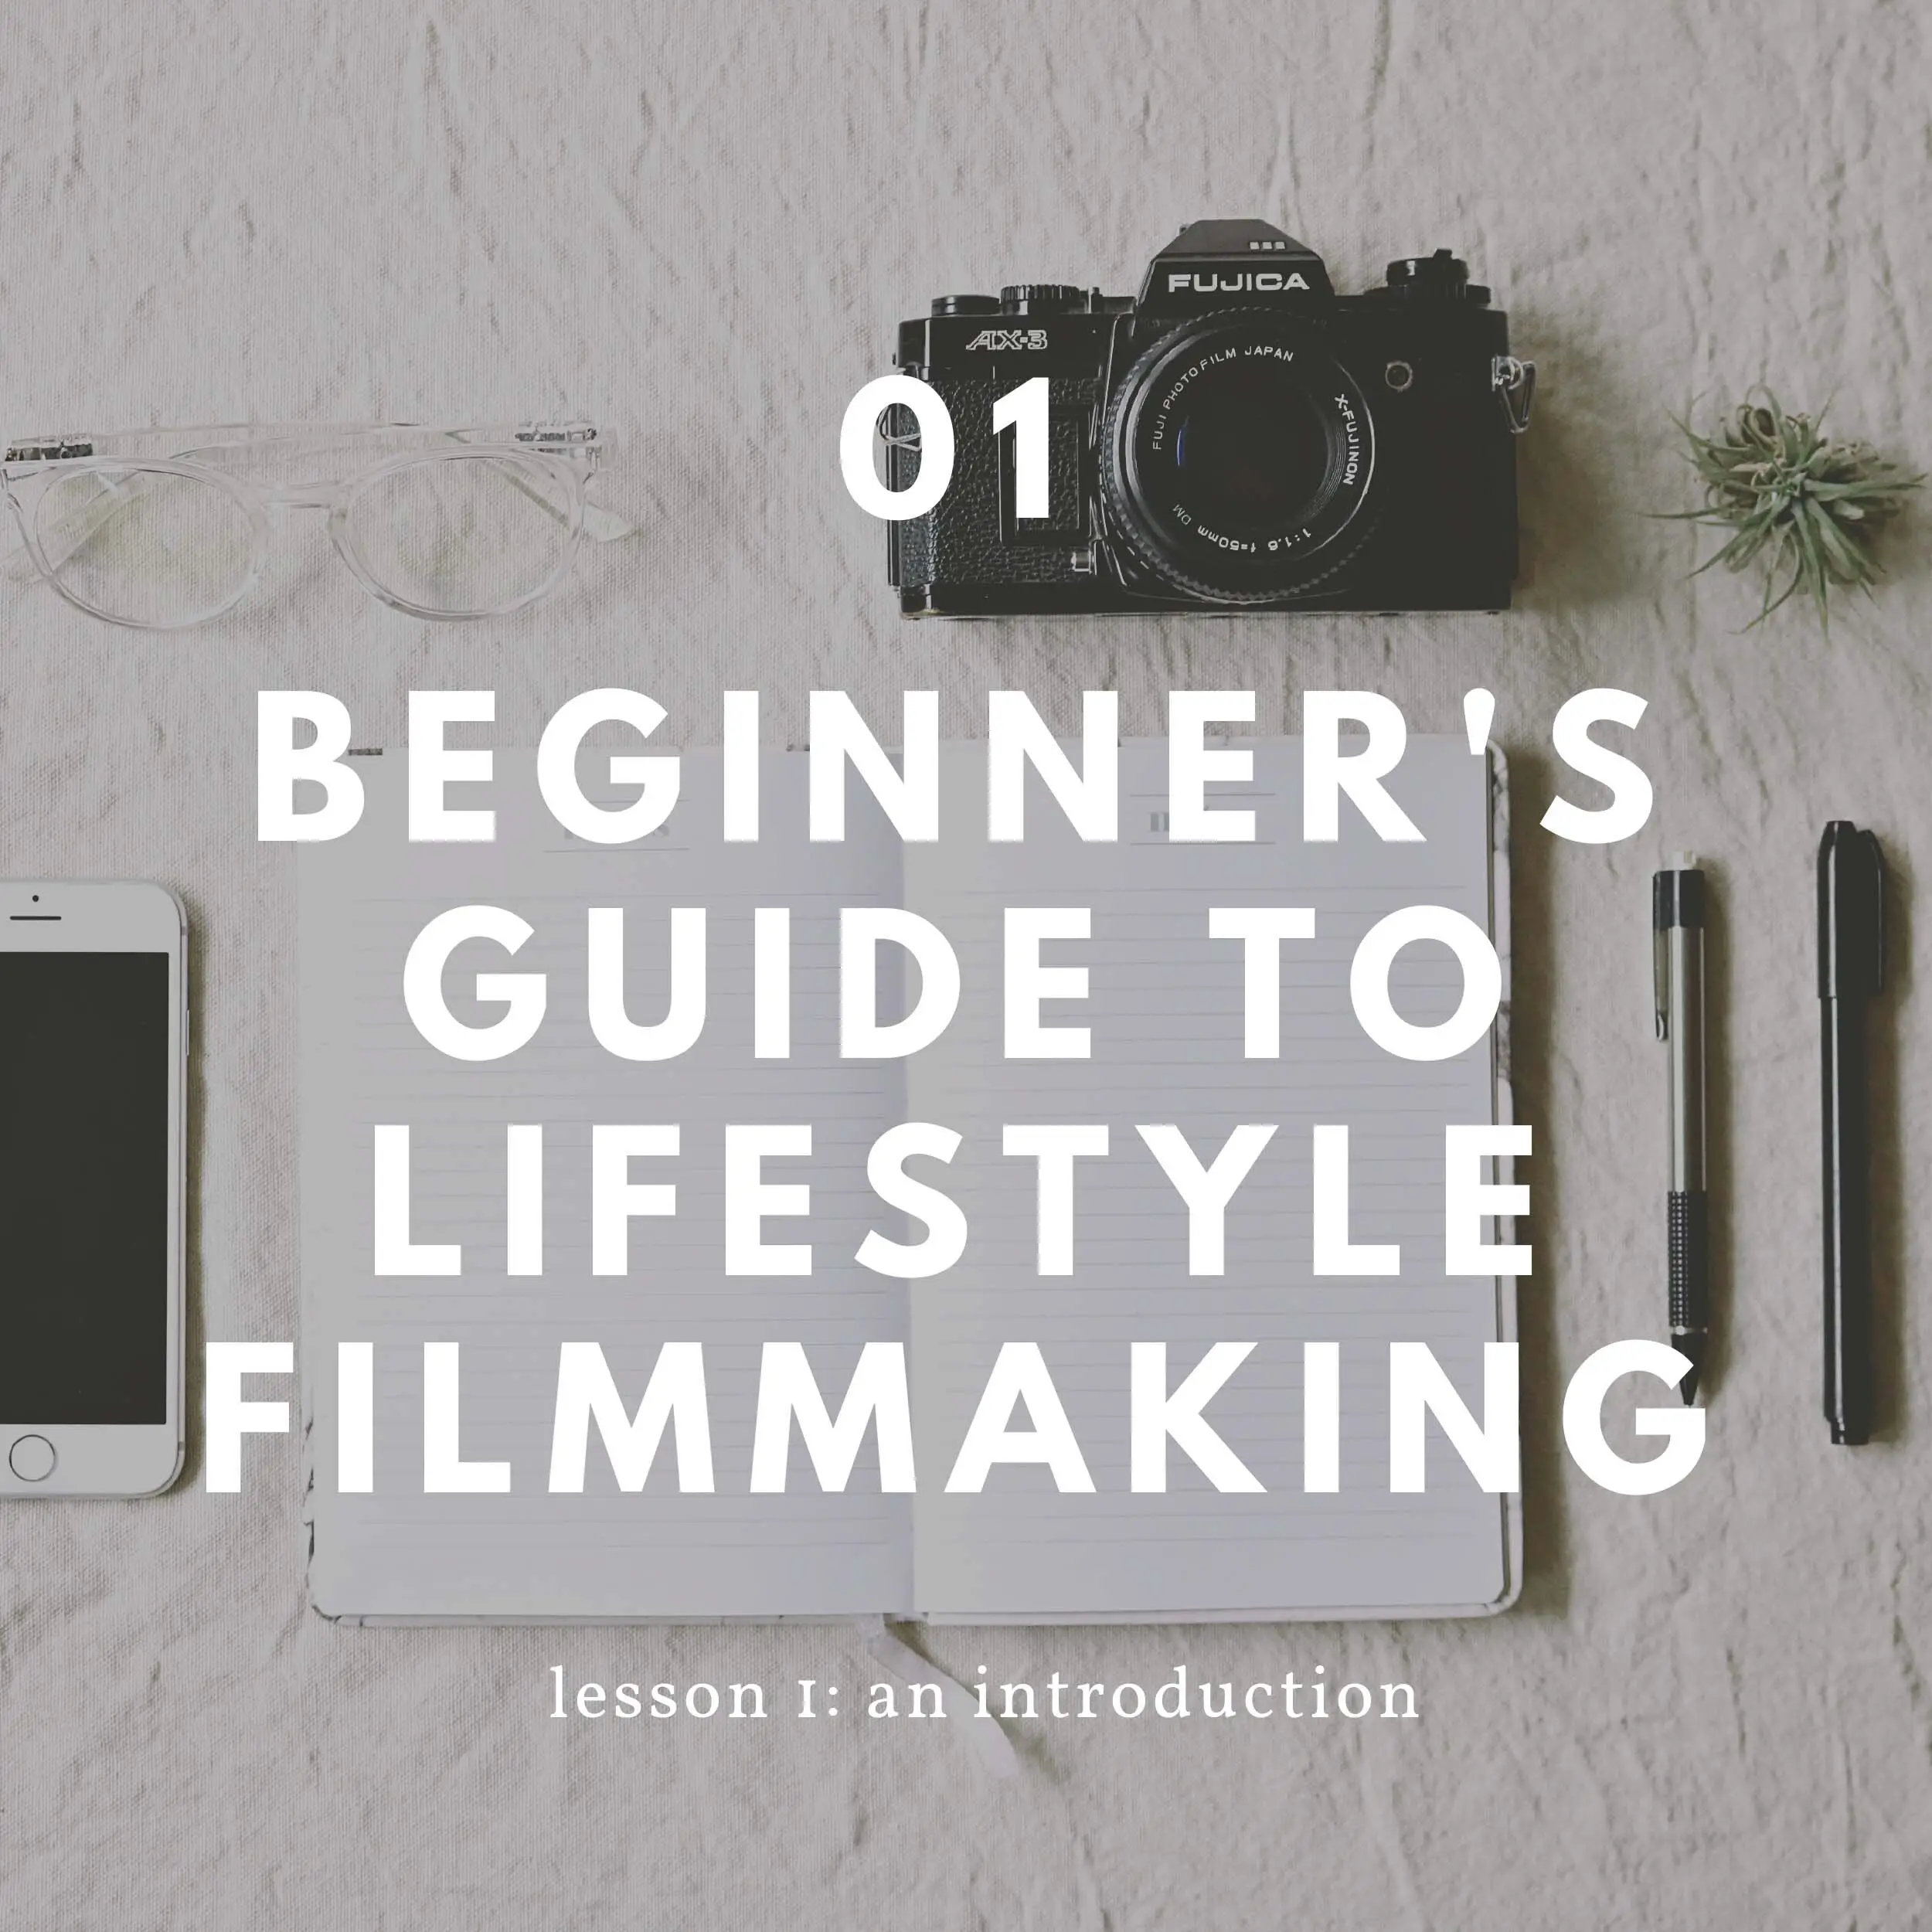 The Beginner's Guide to Lifestyle Filmmaking - Handcraft Films